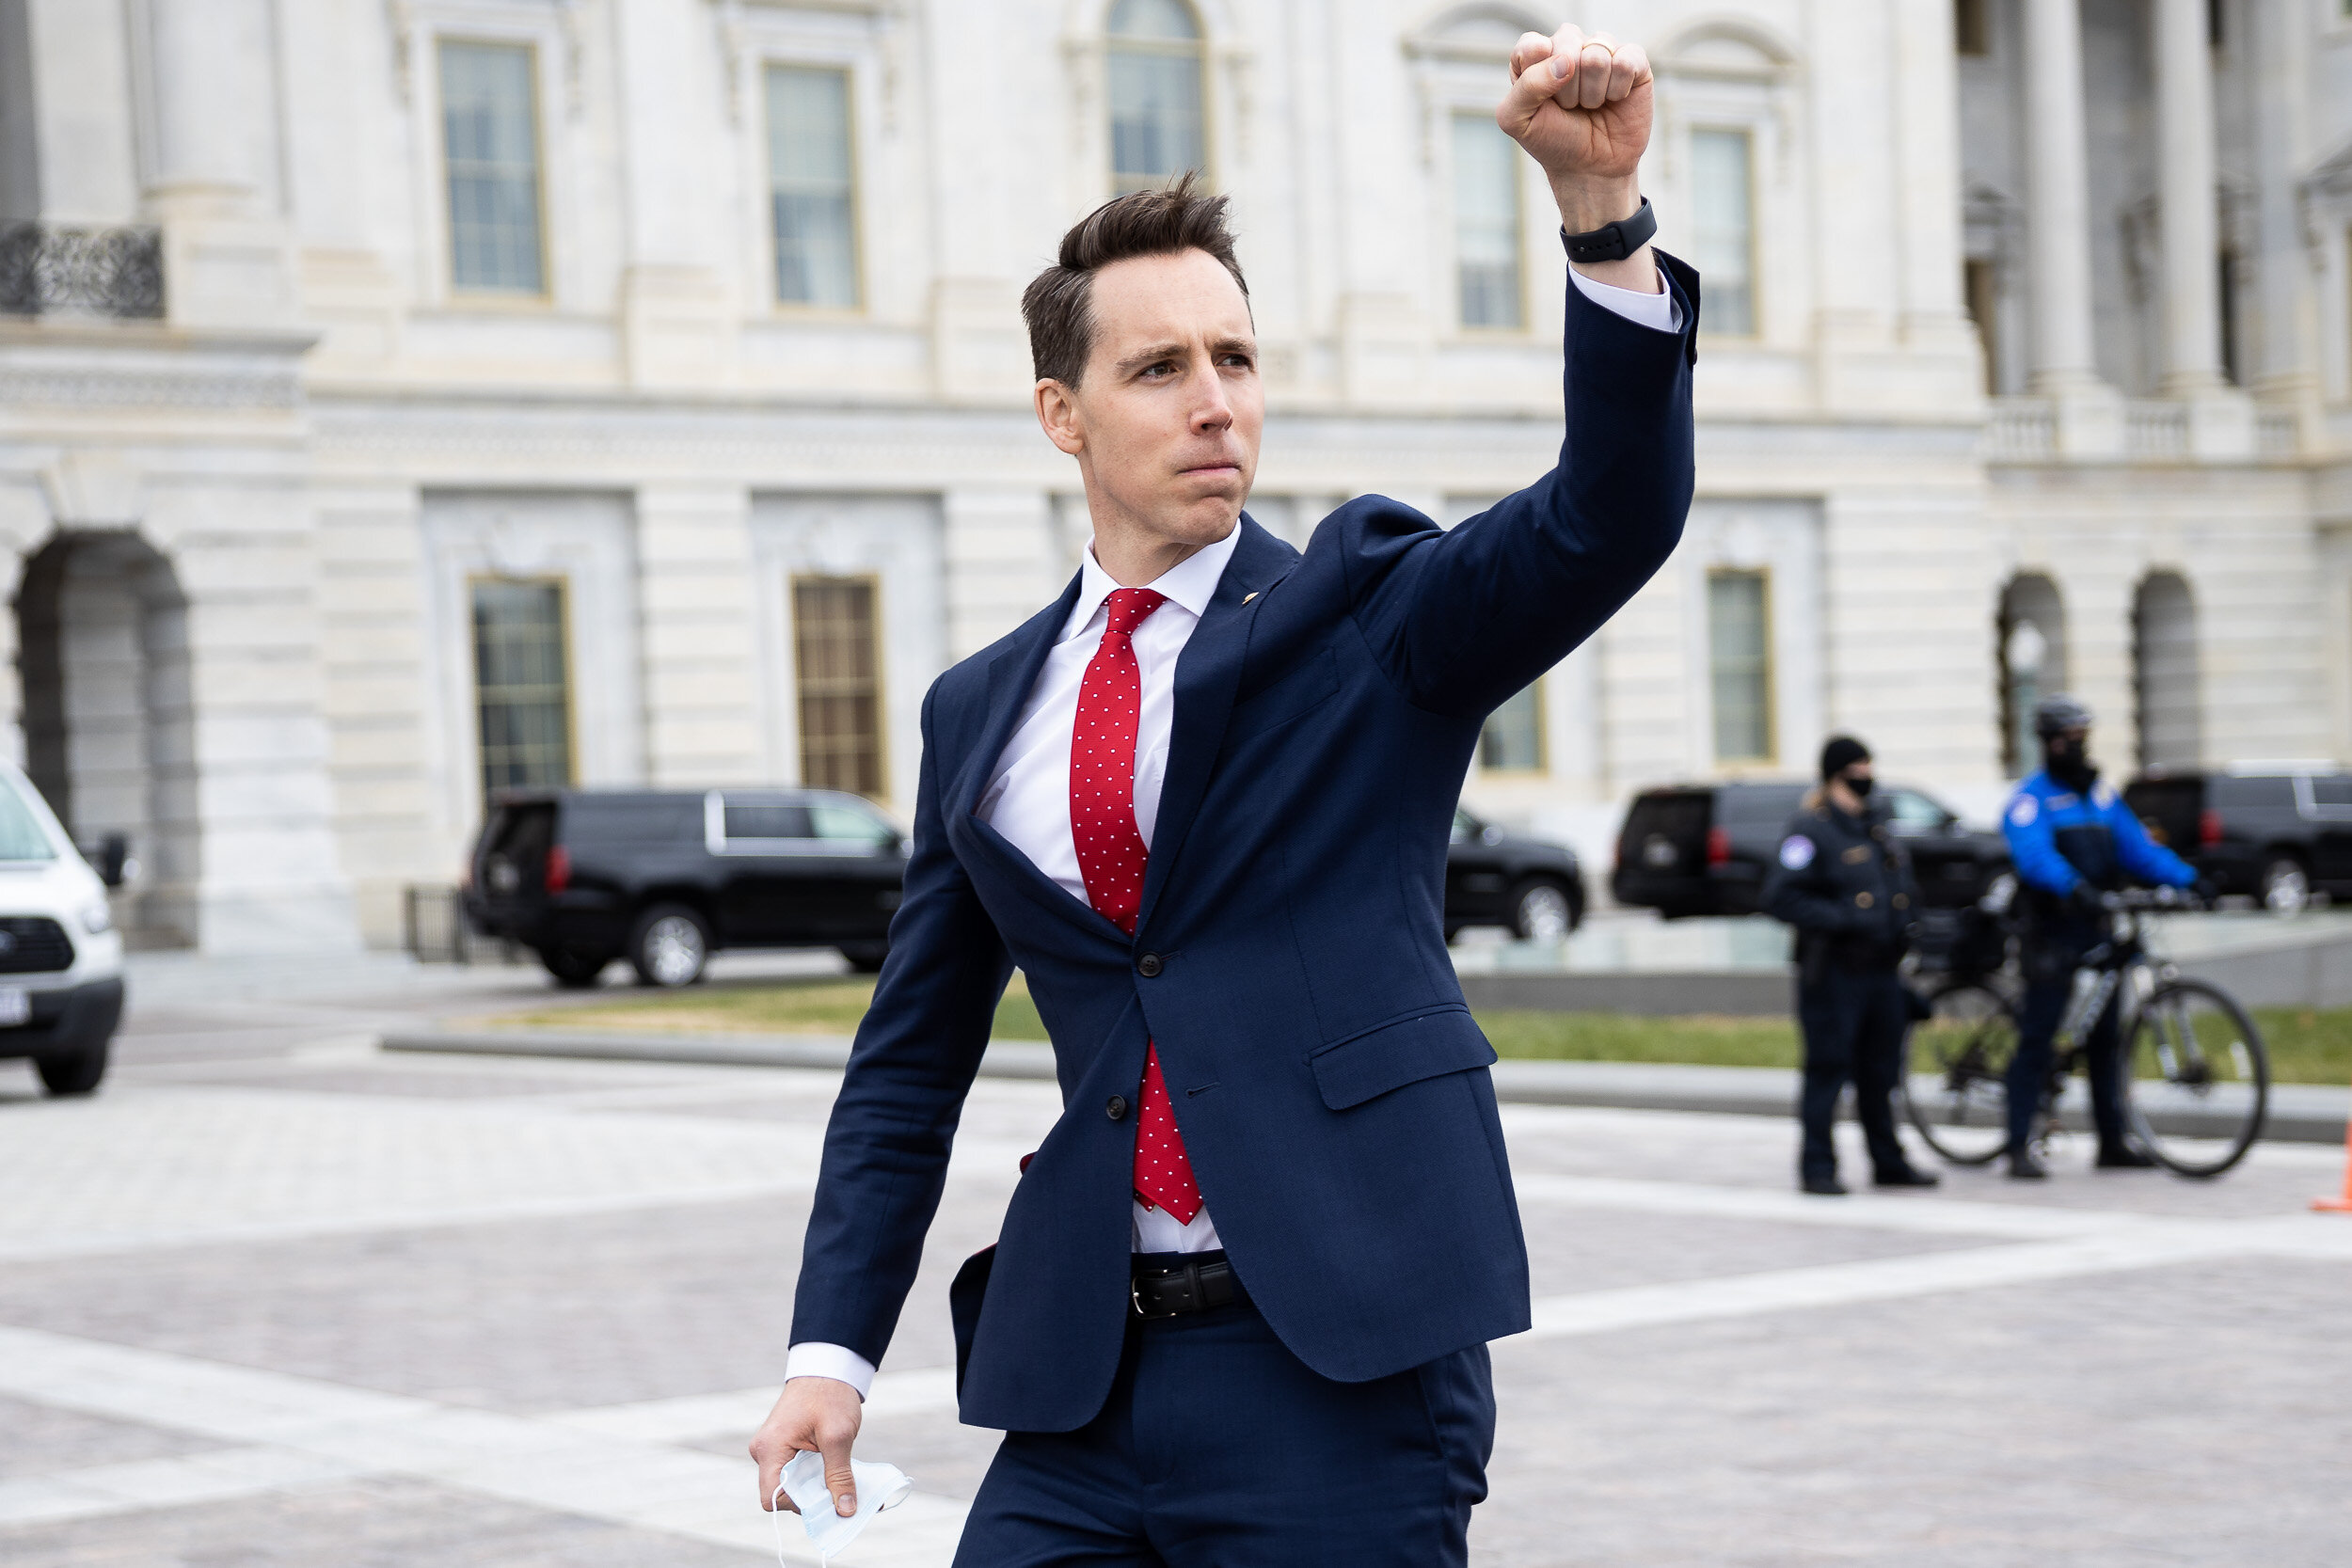  Sen. Josh Hawley (R-Mo.) gestures in solidarity toward a crowd of Trump supporters gathered outside the U.S. Capitol to protest the certification of President-elect Joe Biden’s electoral-college victory Jan. 6, 2021. Soon thereafter, a violent mob s